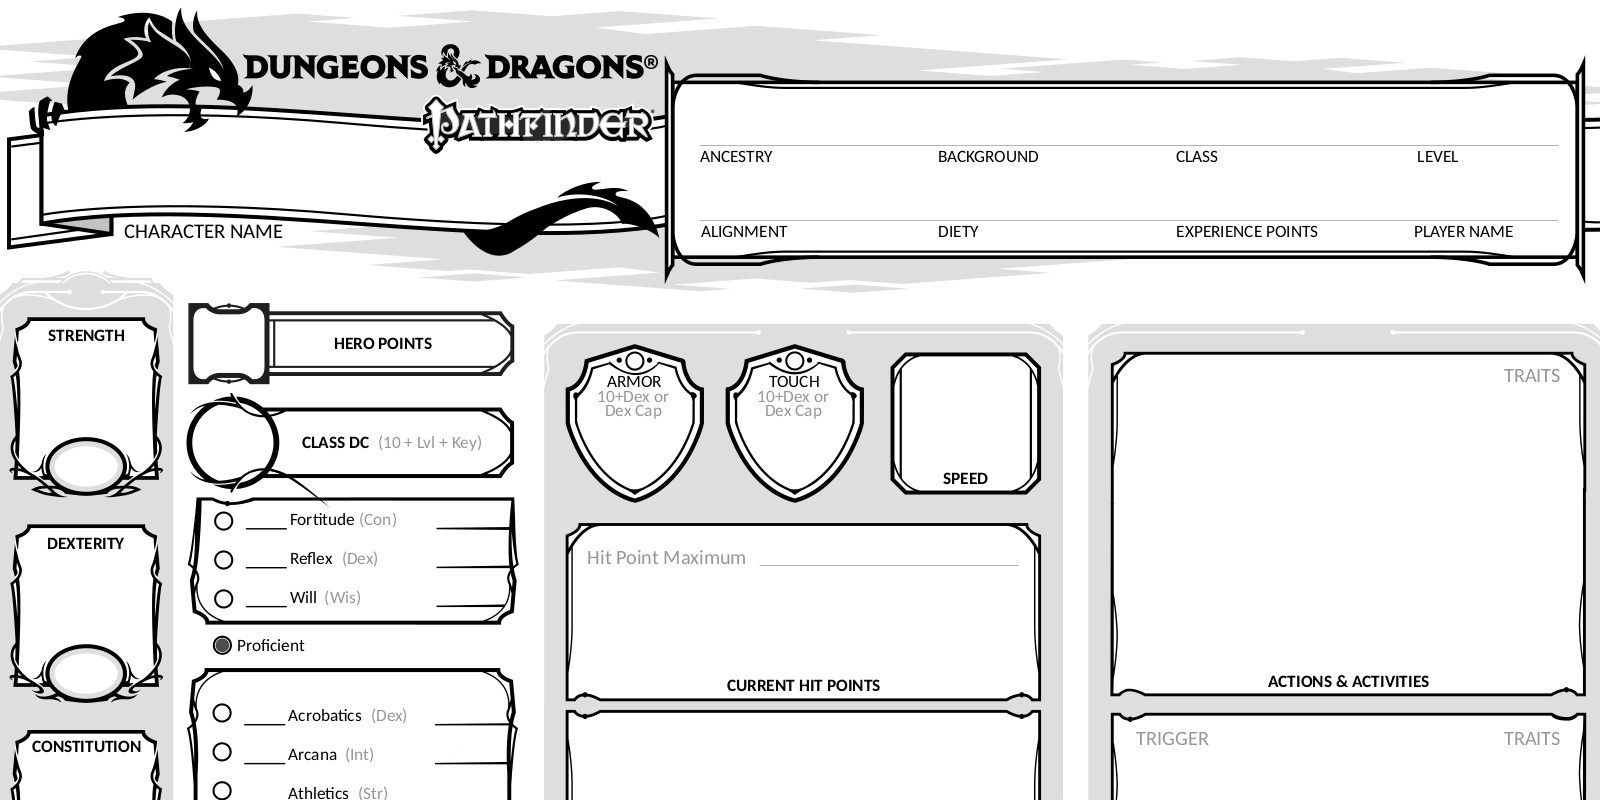 Revised Pathfinder character sheet